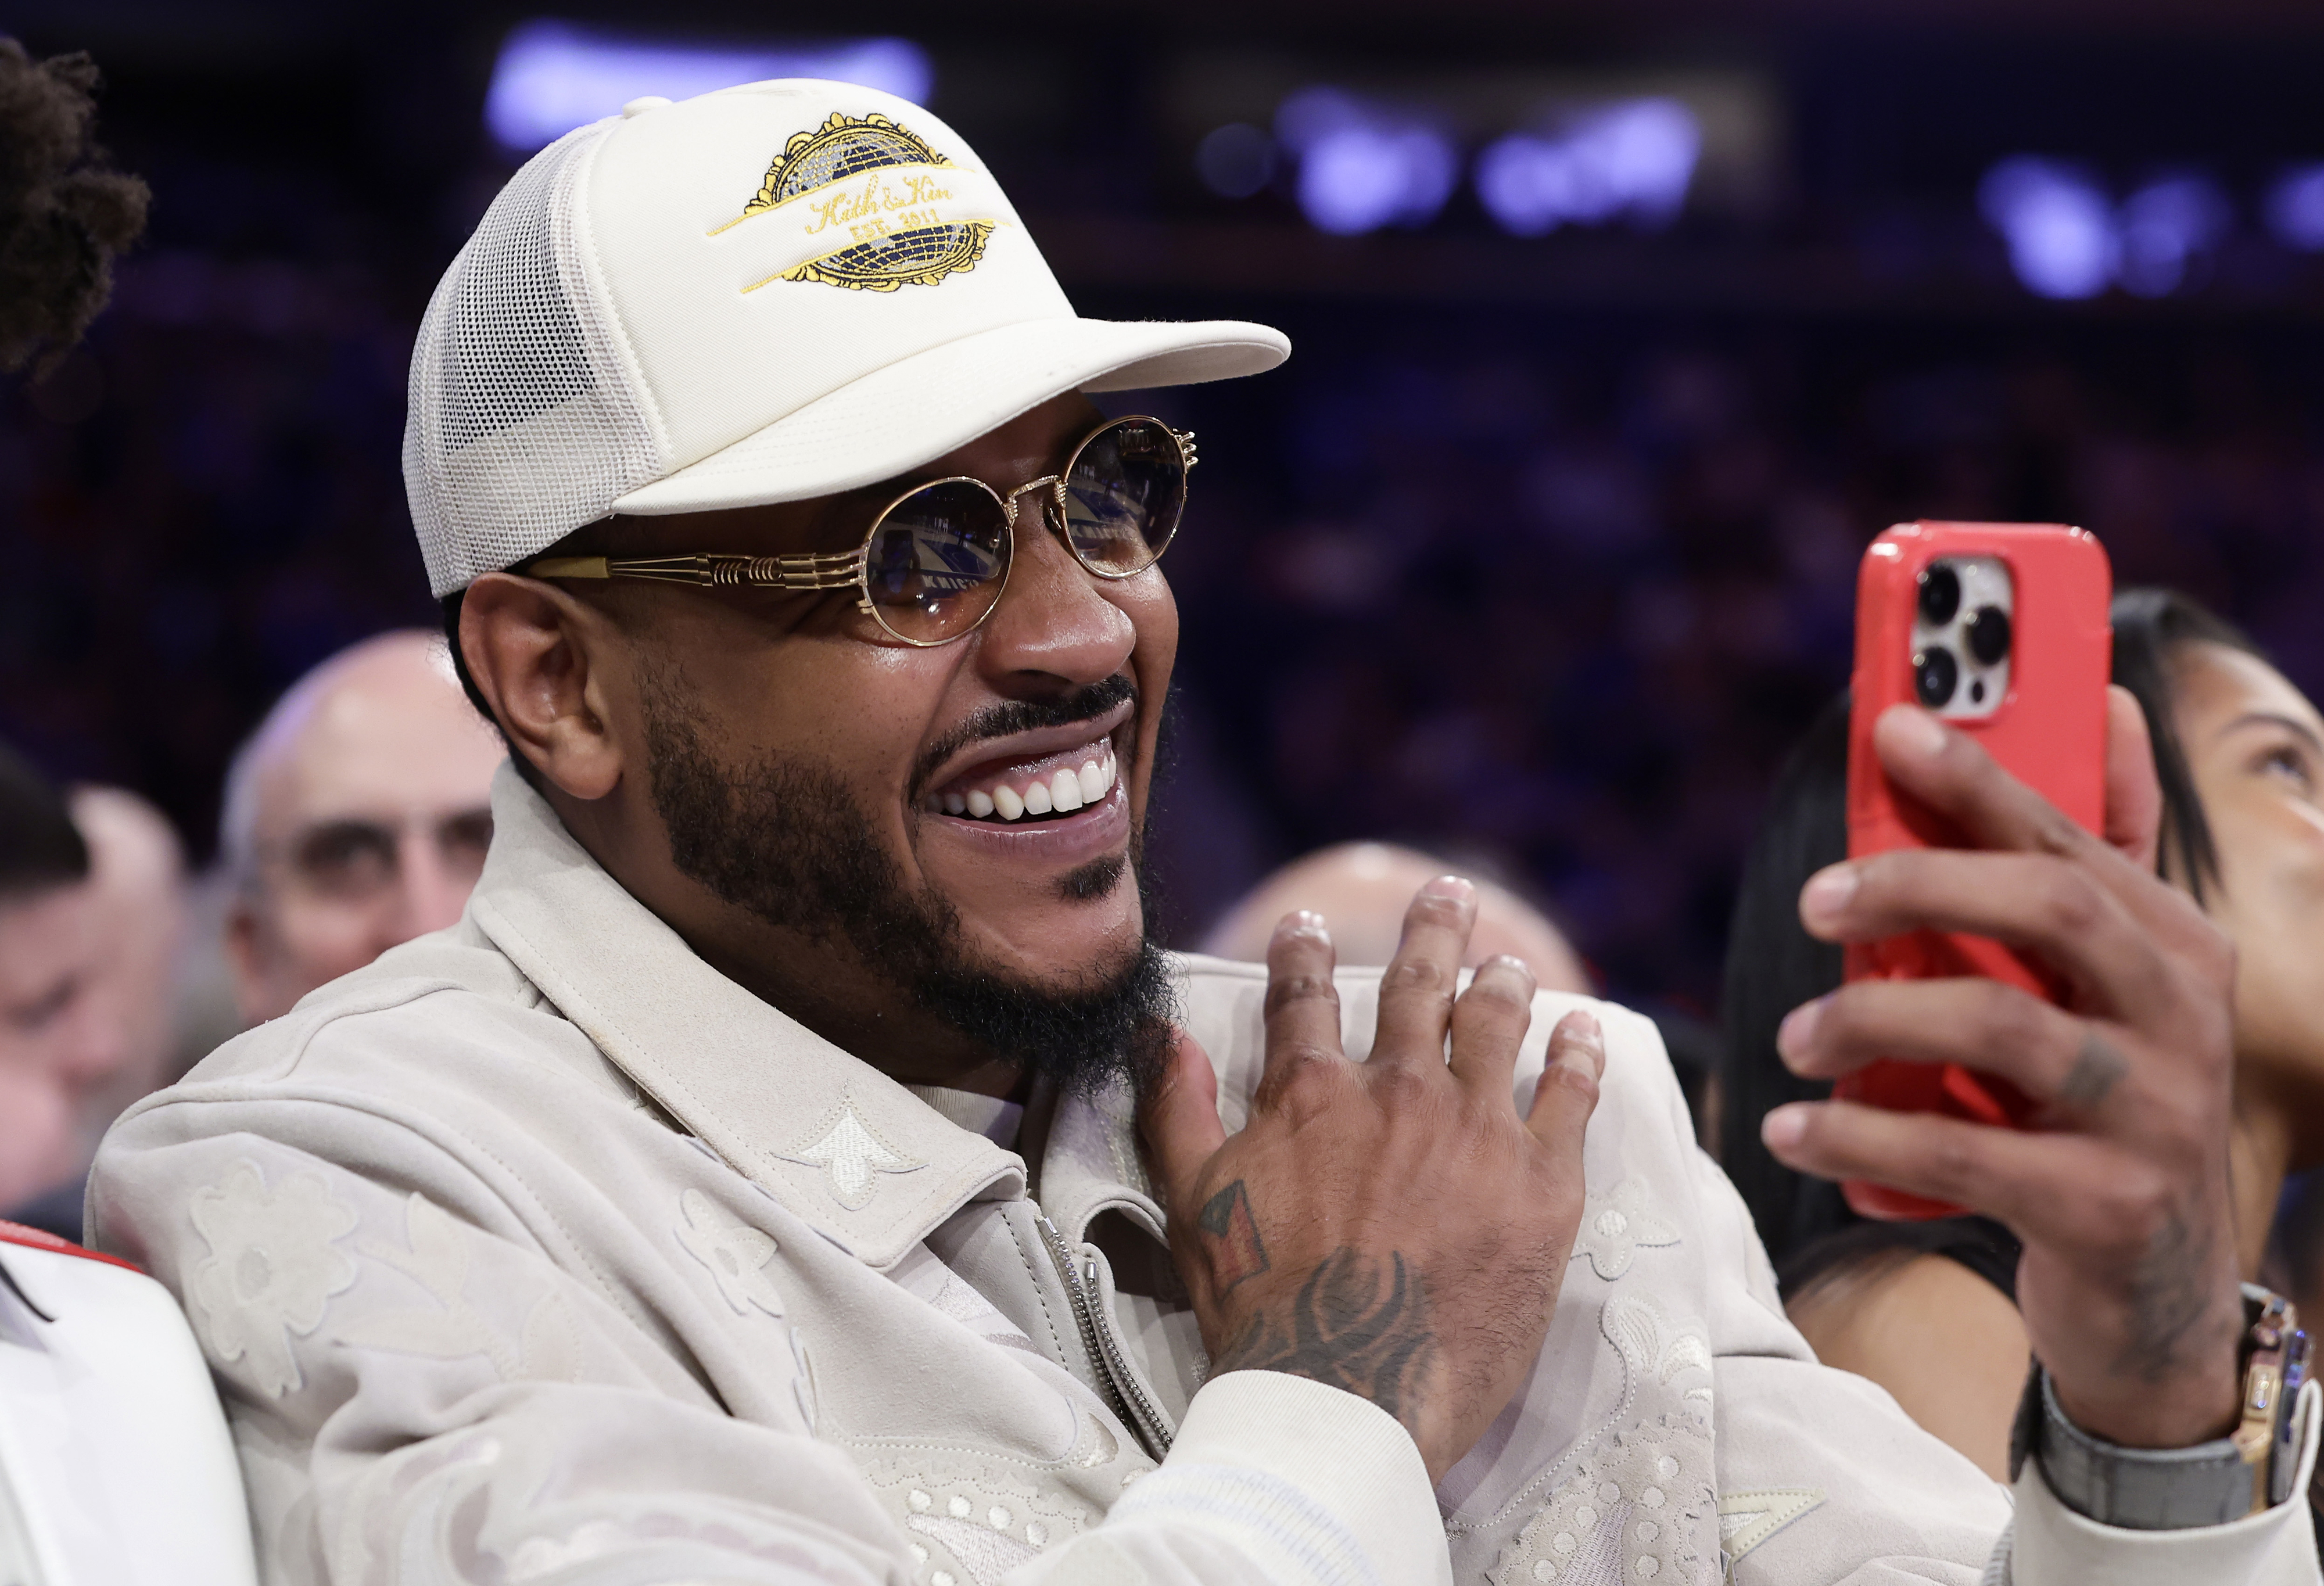 Person smiling and taking a selfie, wearing a cap and sunglasses, casually dressed